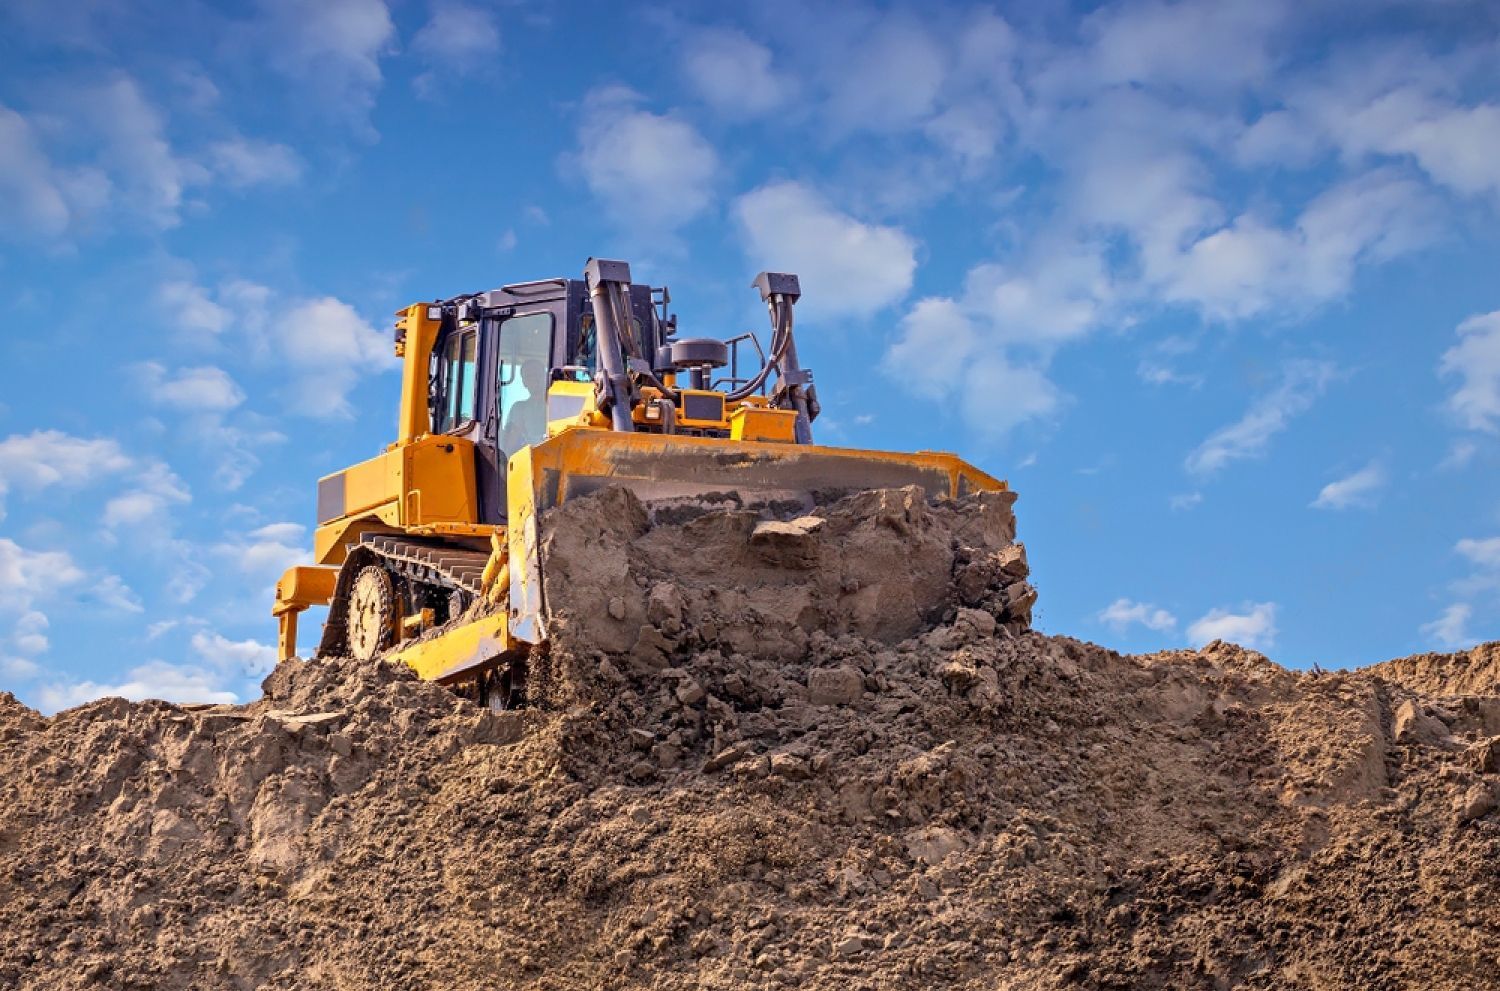 Dozer dry hire: frequently asked questions